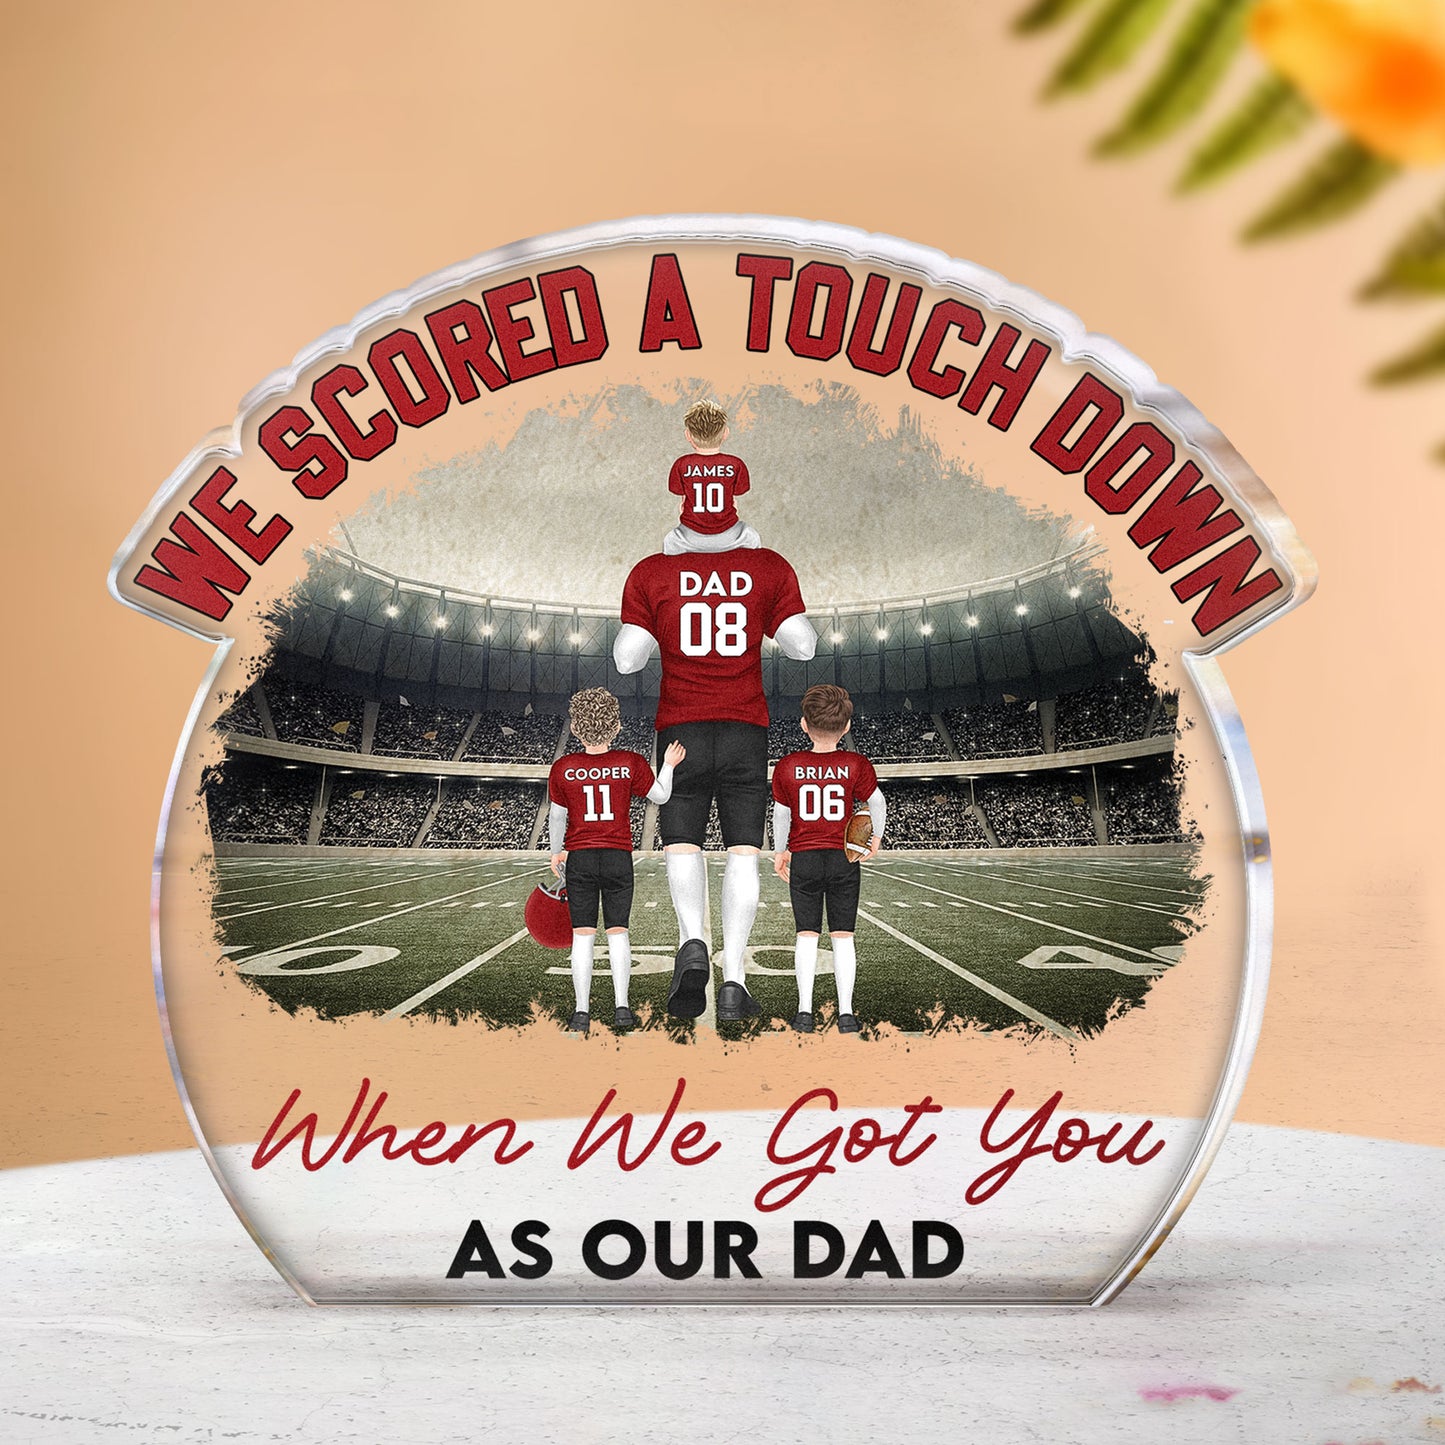 We Scored A Touch Down - Personalized Acrylic Plaque